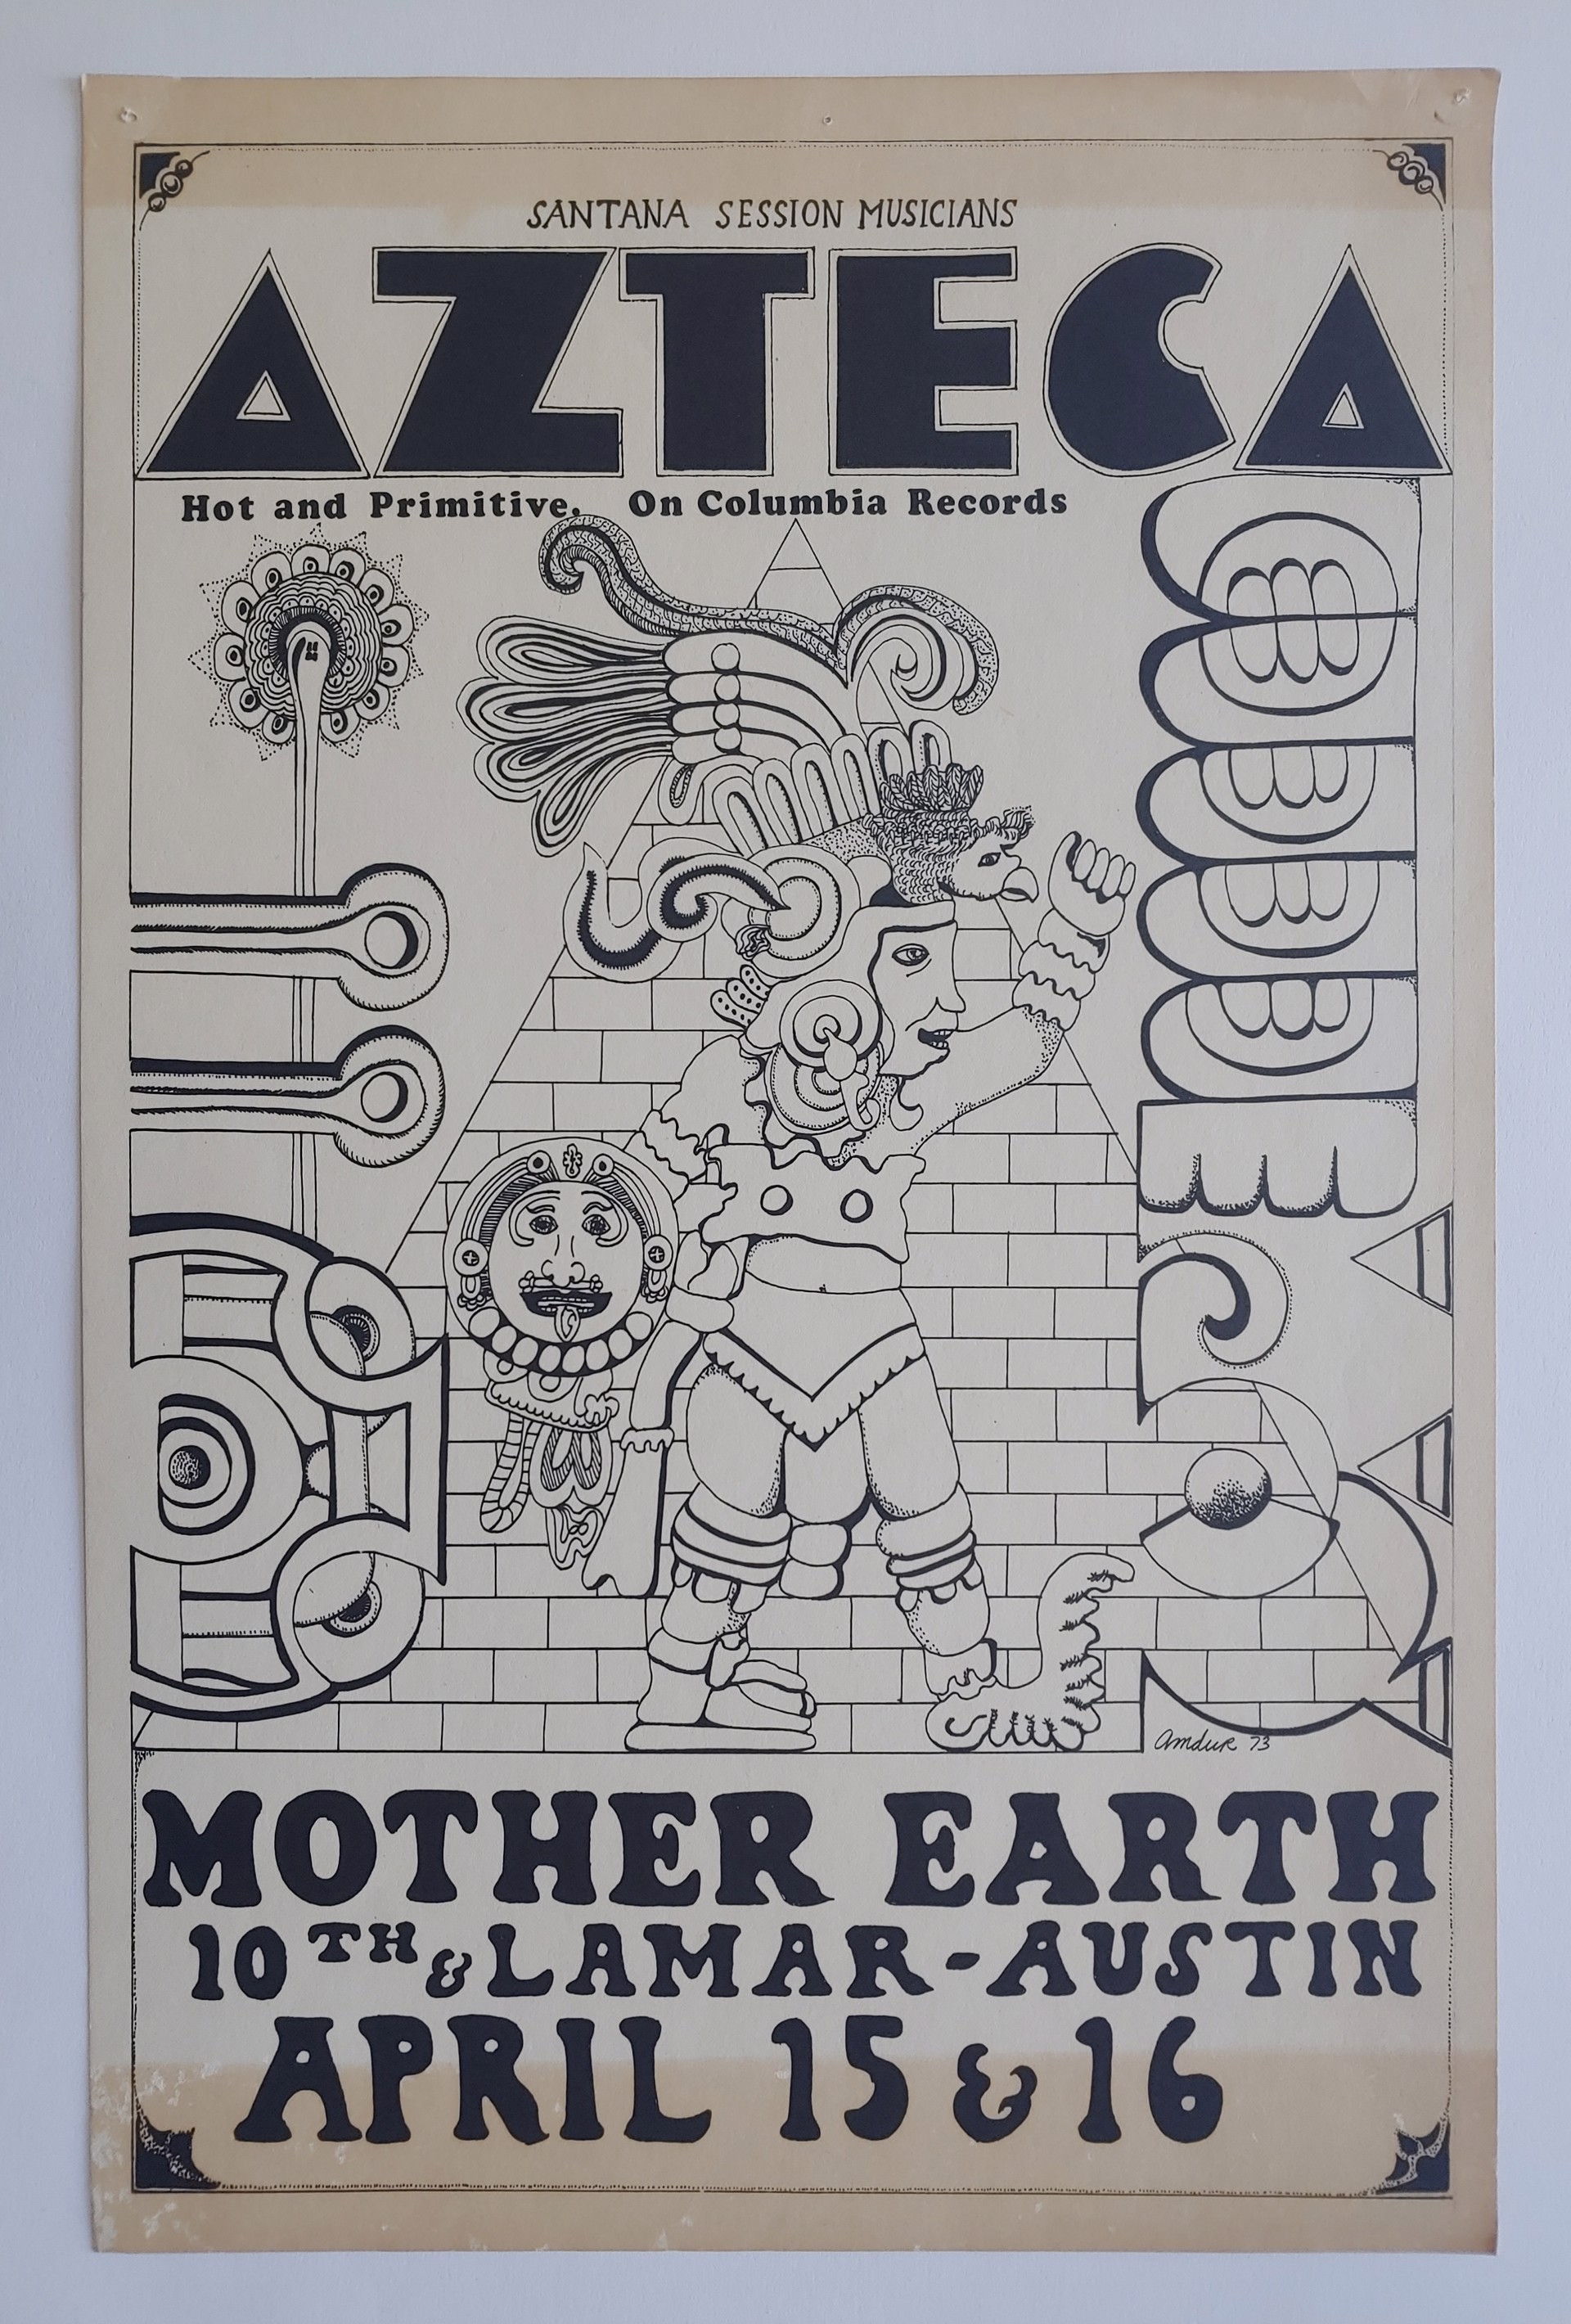 Azteca/Mother Earth - Poster #2 by David Amdur